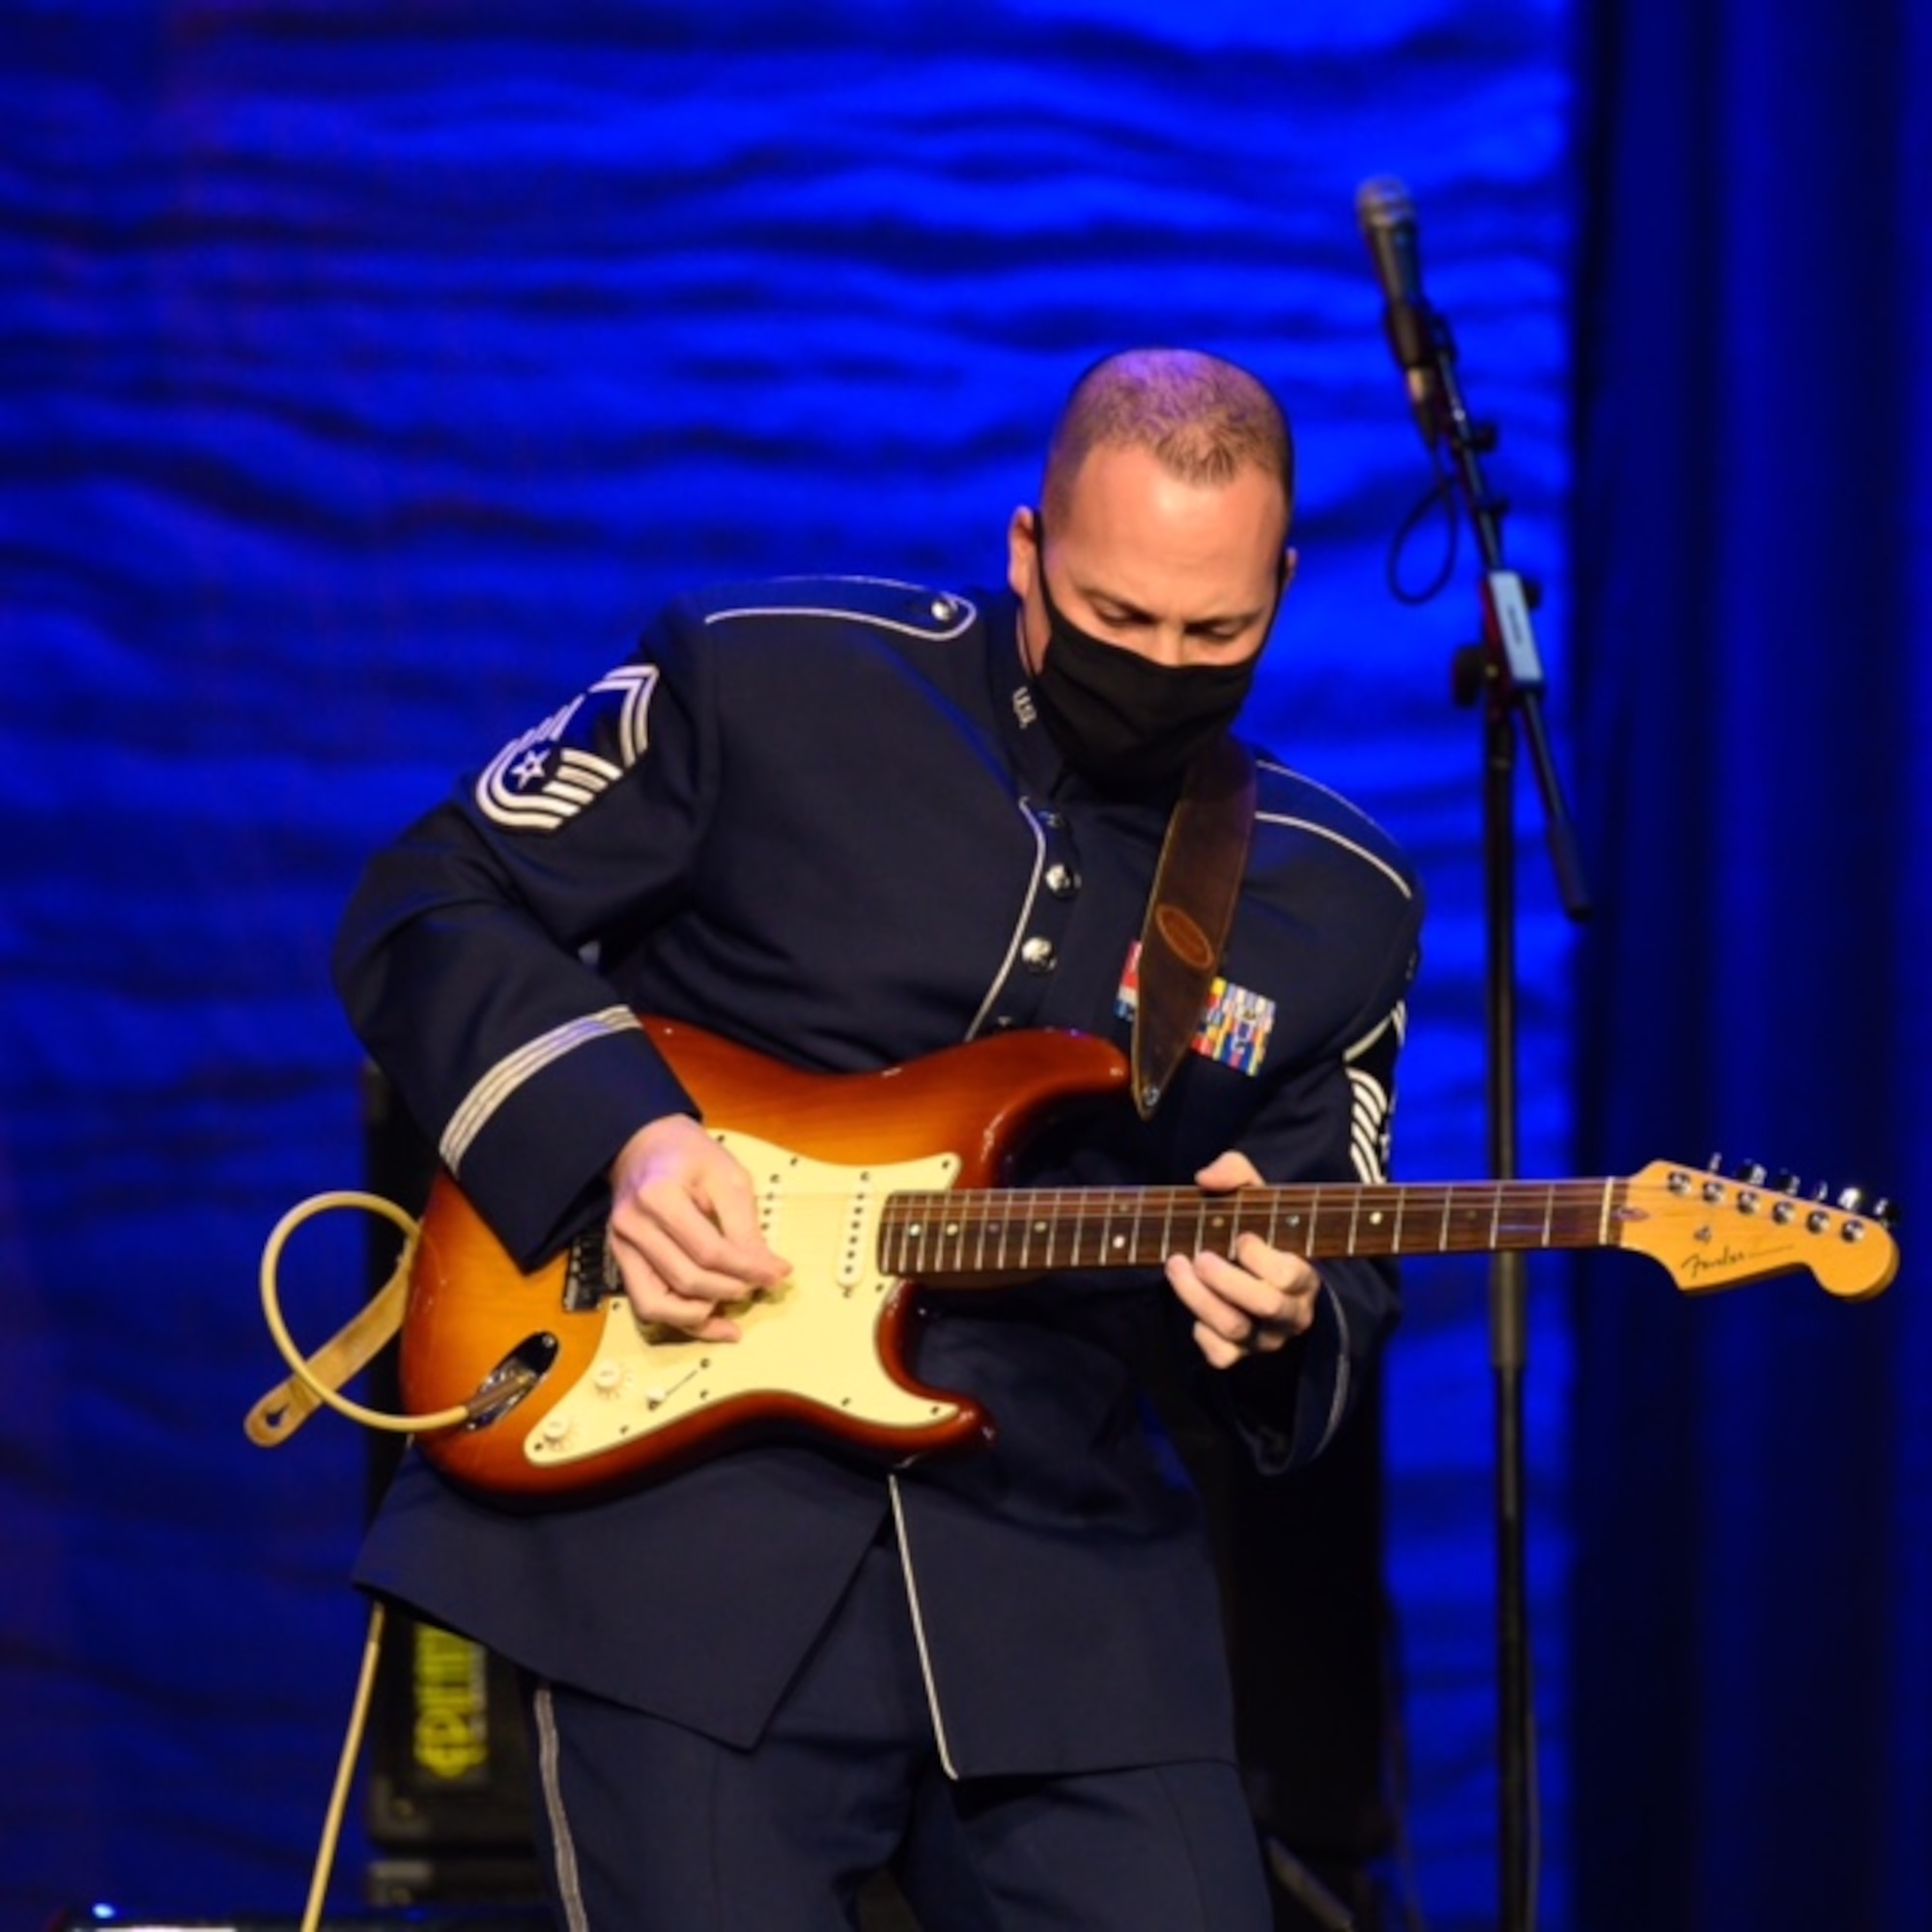 Senior Master Sgt. Matt Ascione performs with Max Impact on the special virtual live Veteran’s Day Concert at the MGM Hotel.